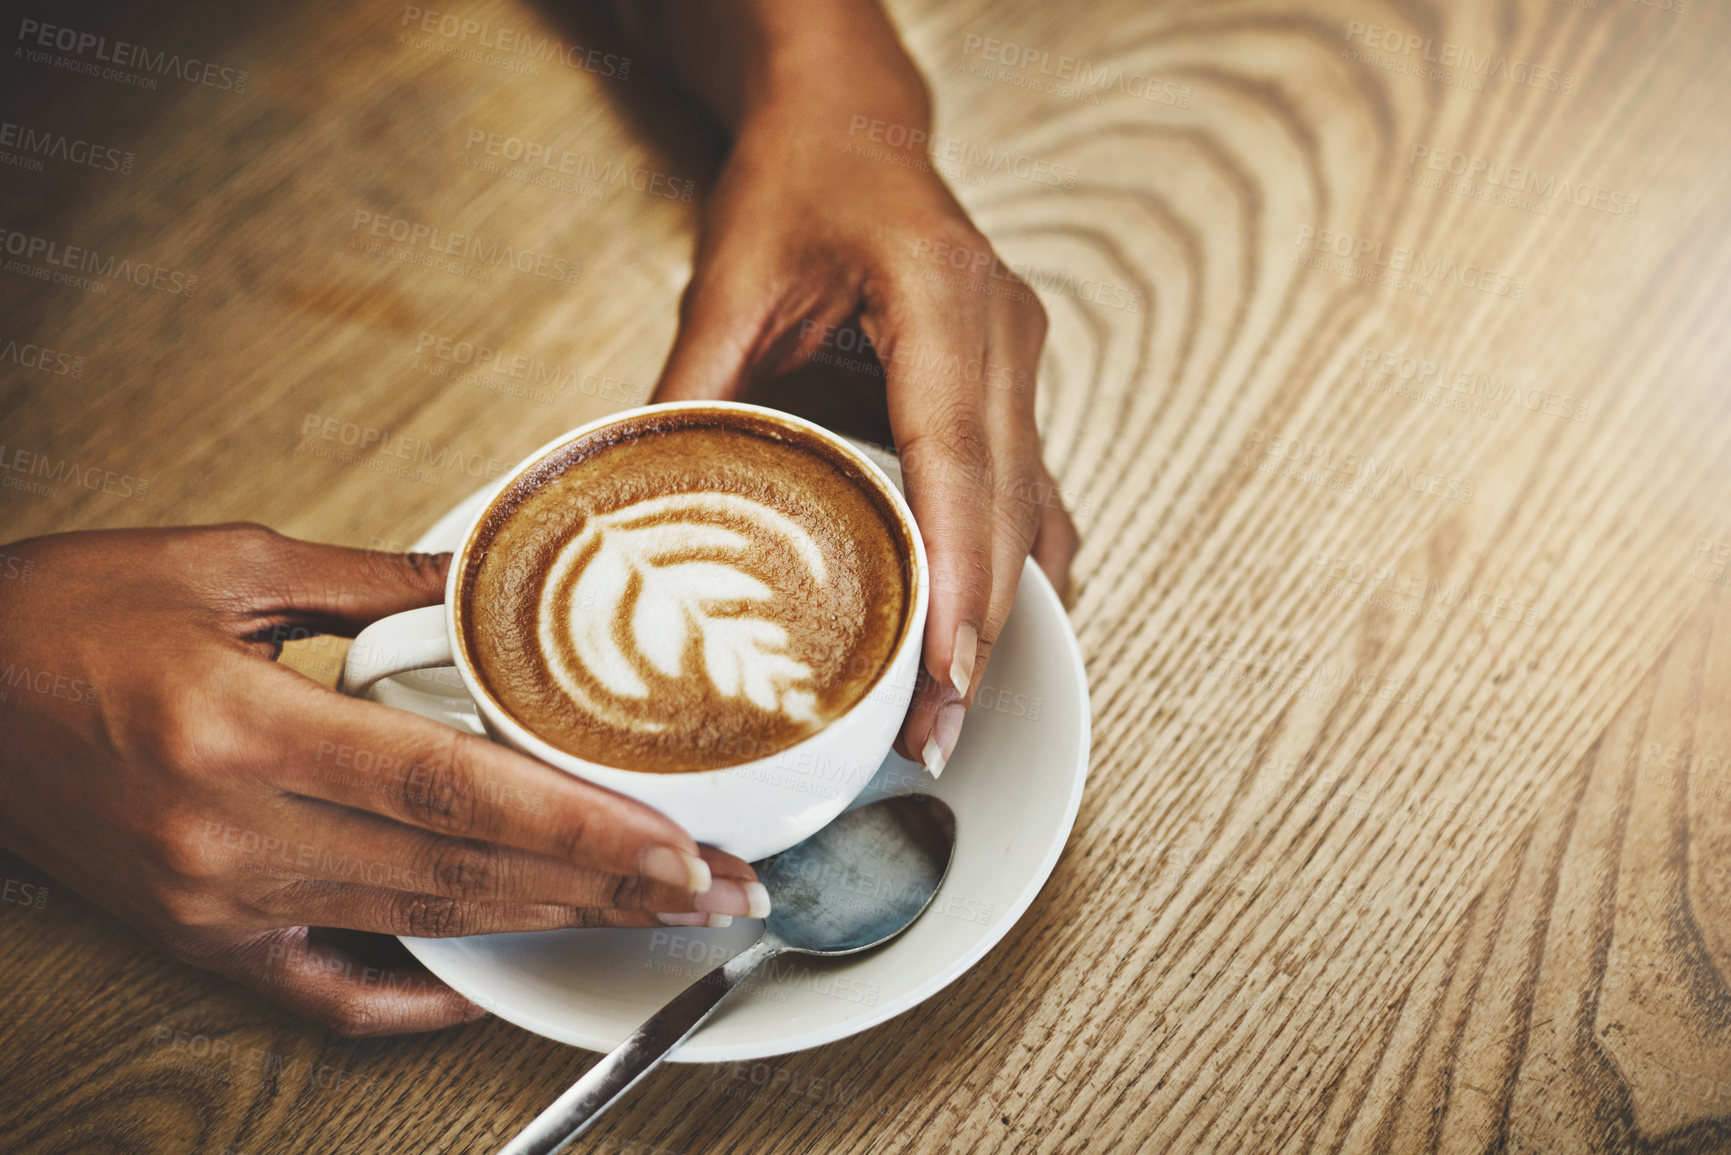 Buy stock photo High angle shot of an unrecognizable woman holding a cup of coffee decorated with froth art